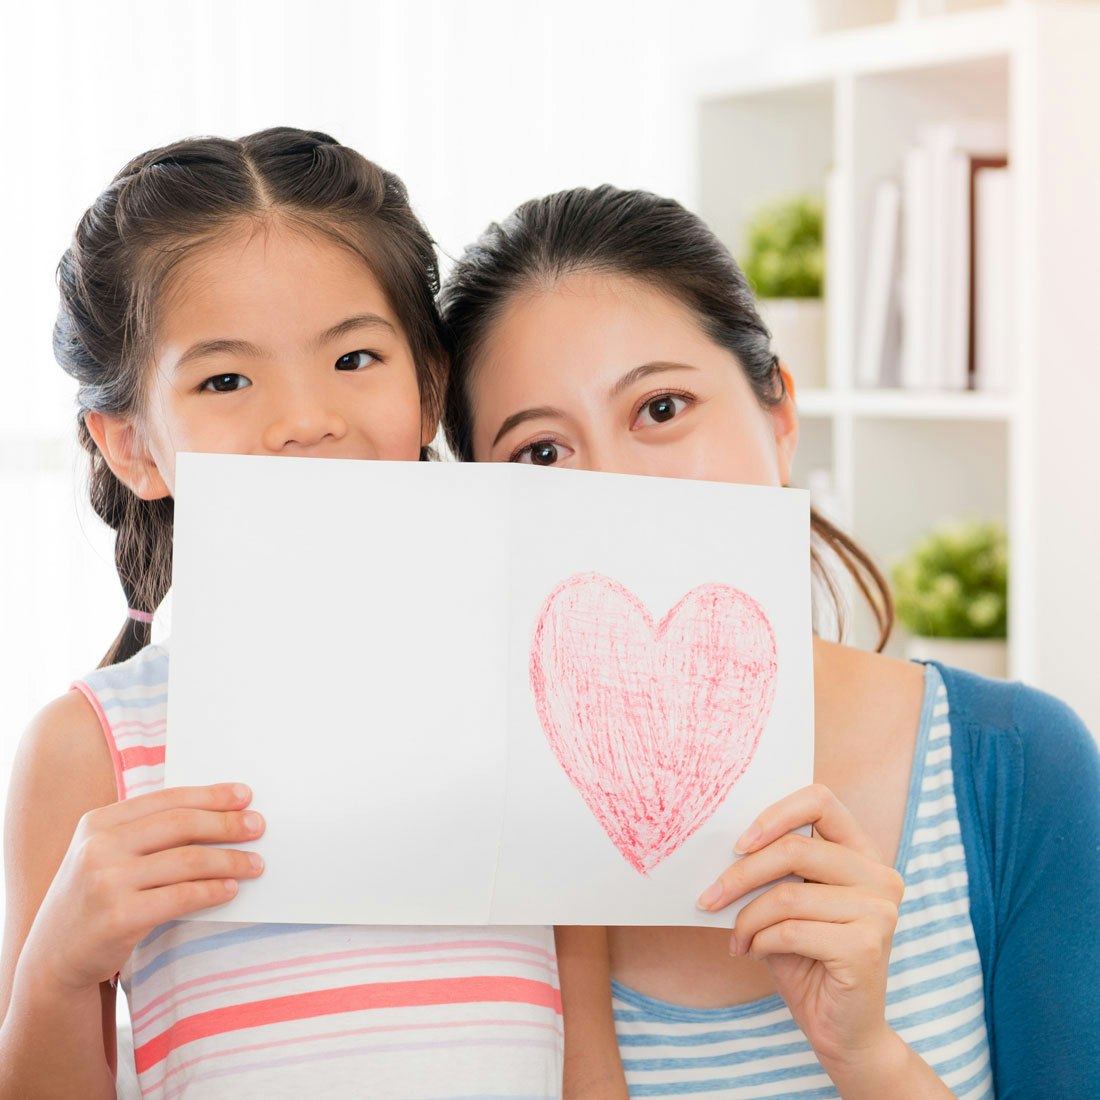 mom-and-daughter-holding-drawing-of-heart.jpg